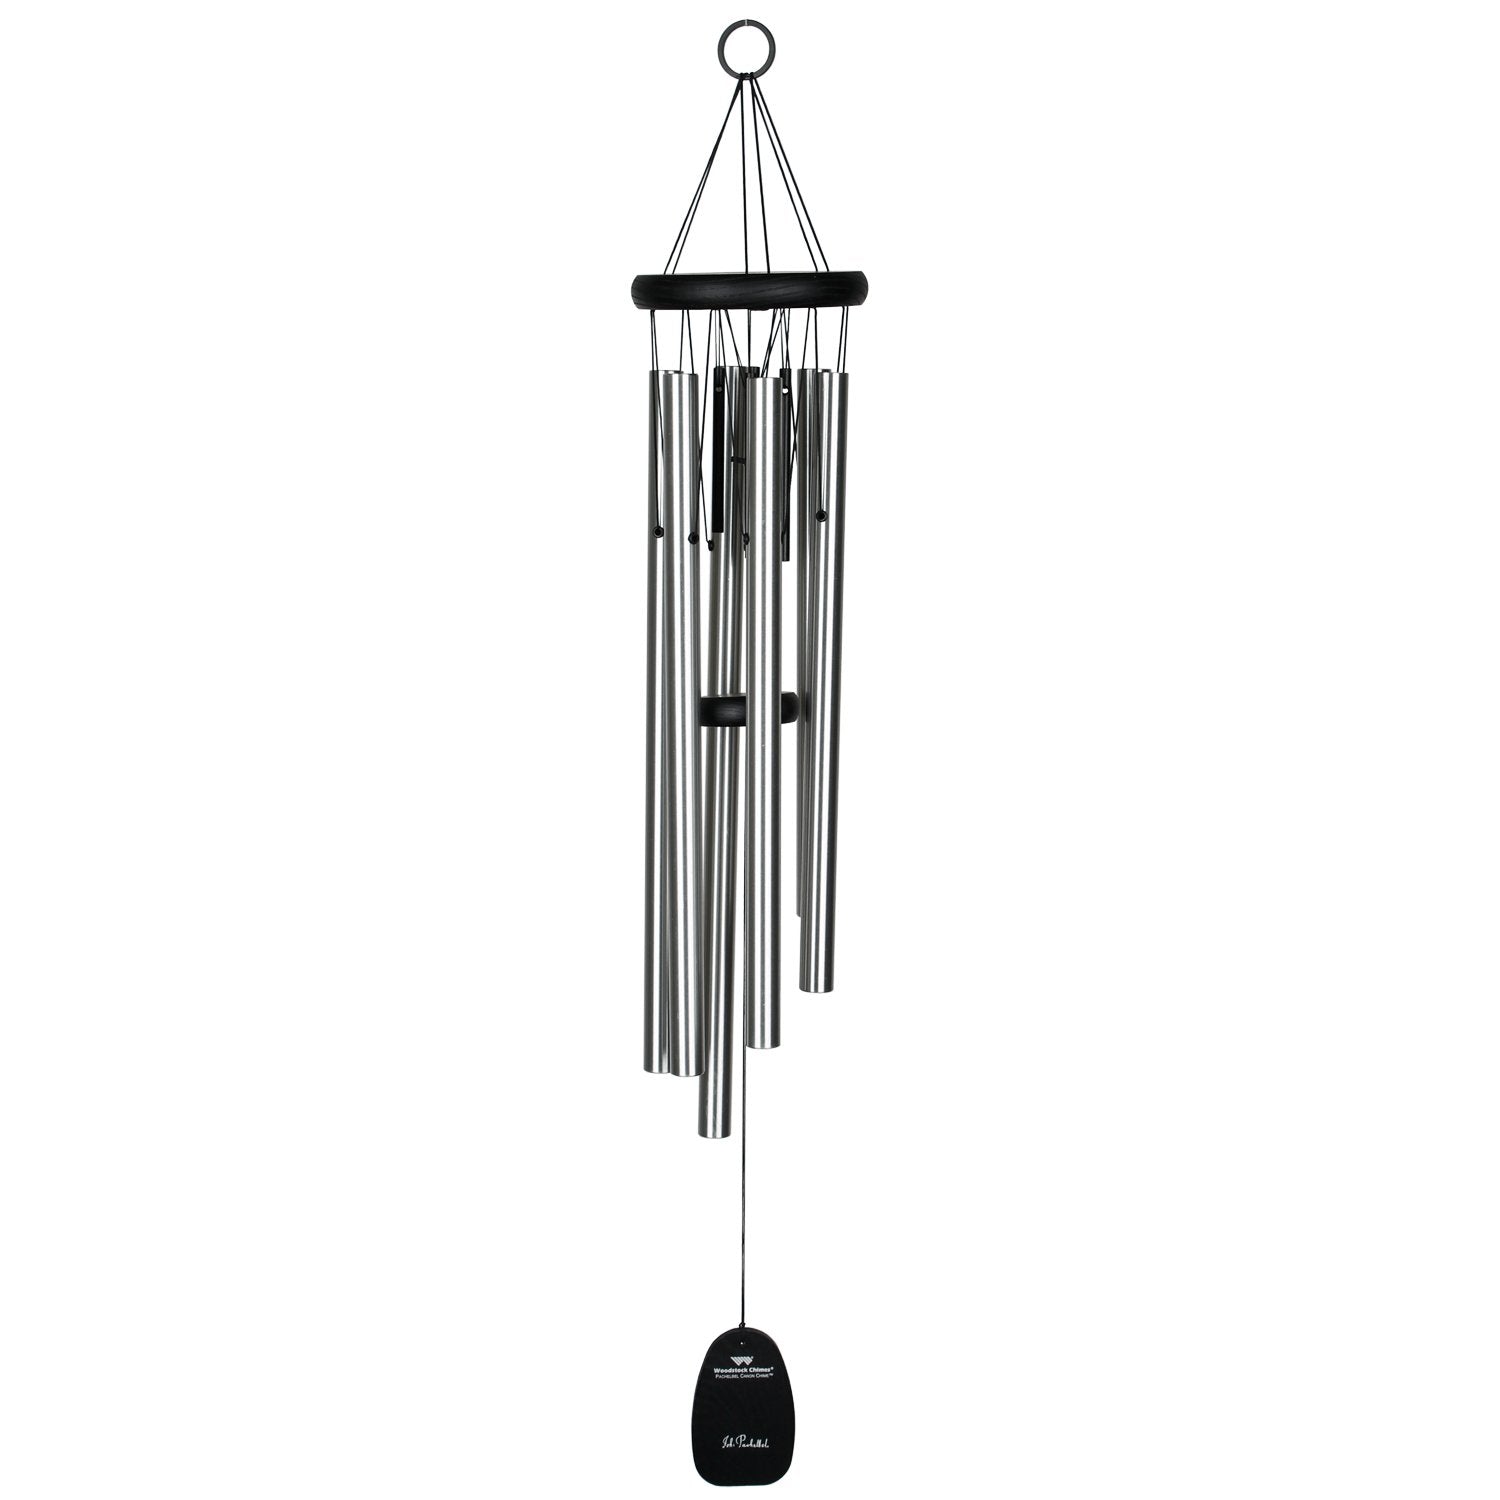 Woodstock Wind Chimes Signature Collection, Pachelbel Canon Chime, 32'' Silver Wind Chime PCC - image 1 of 7